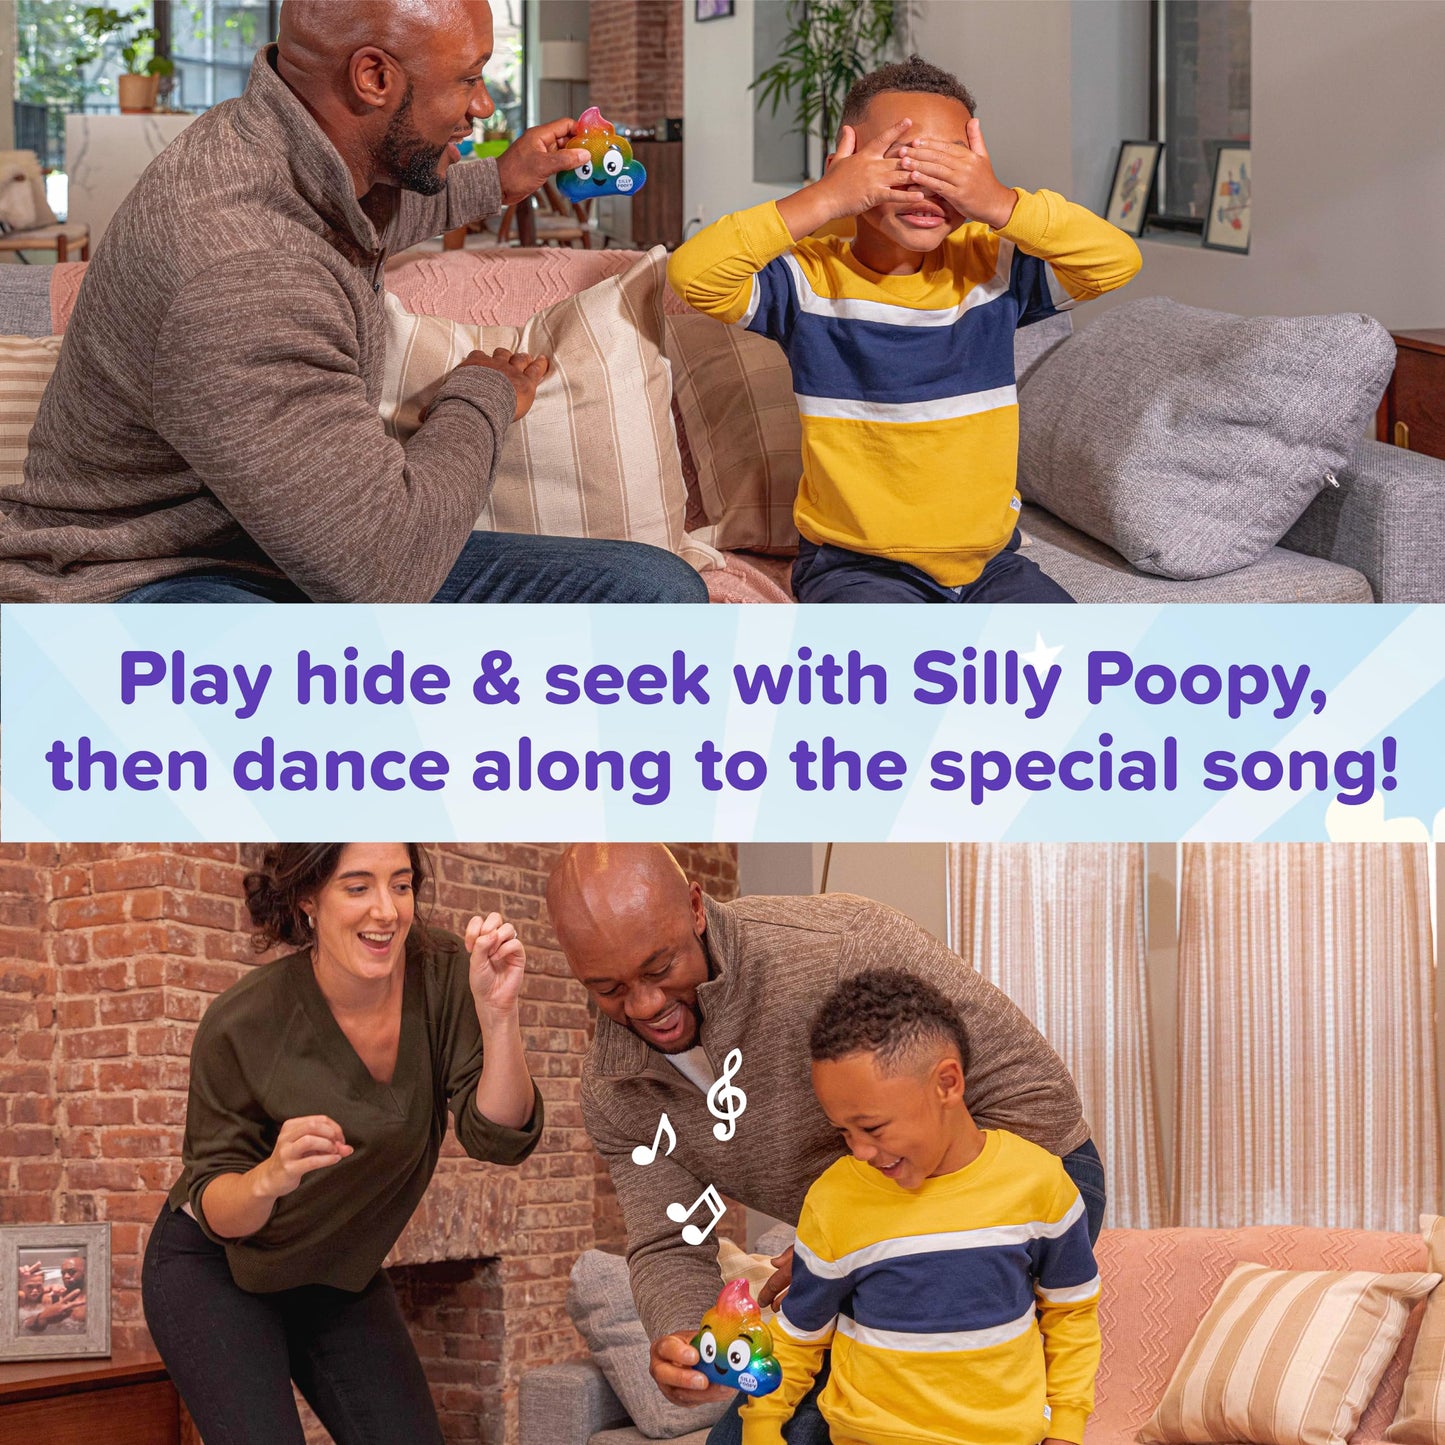 WHAT DO YOU MEME? Silly Poopy's Hide & Seek - The Talking, Singing Rainbow Poop Toy - Interactive Toys for 3 Year Olds